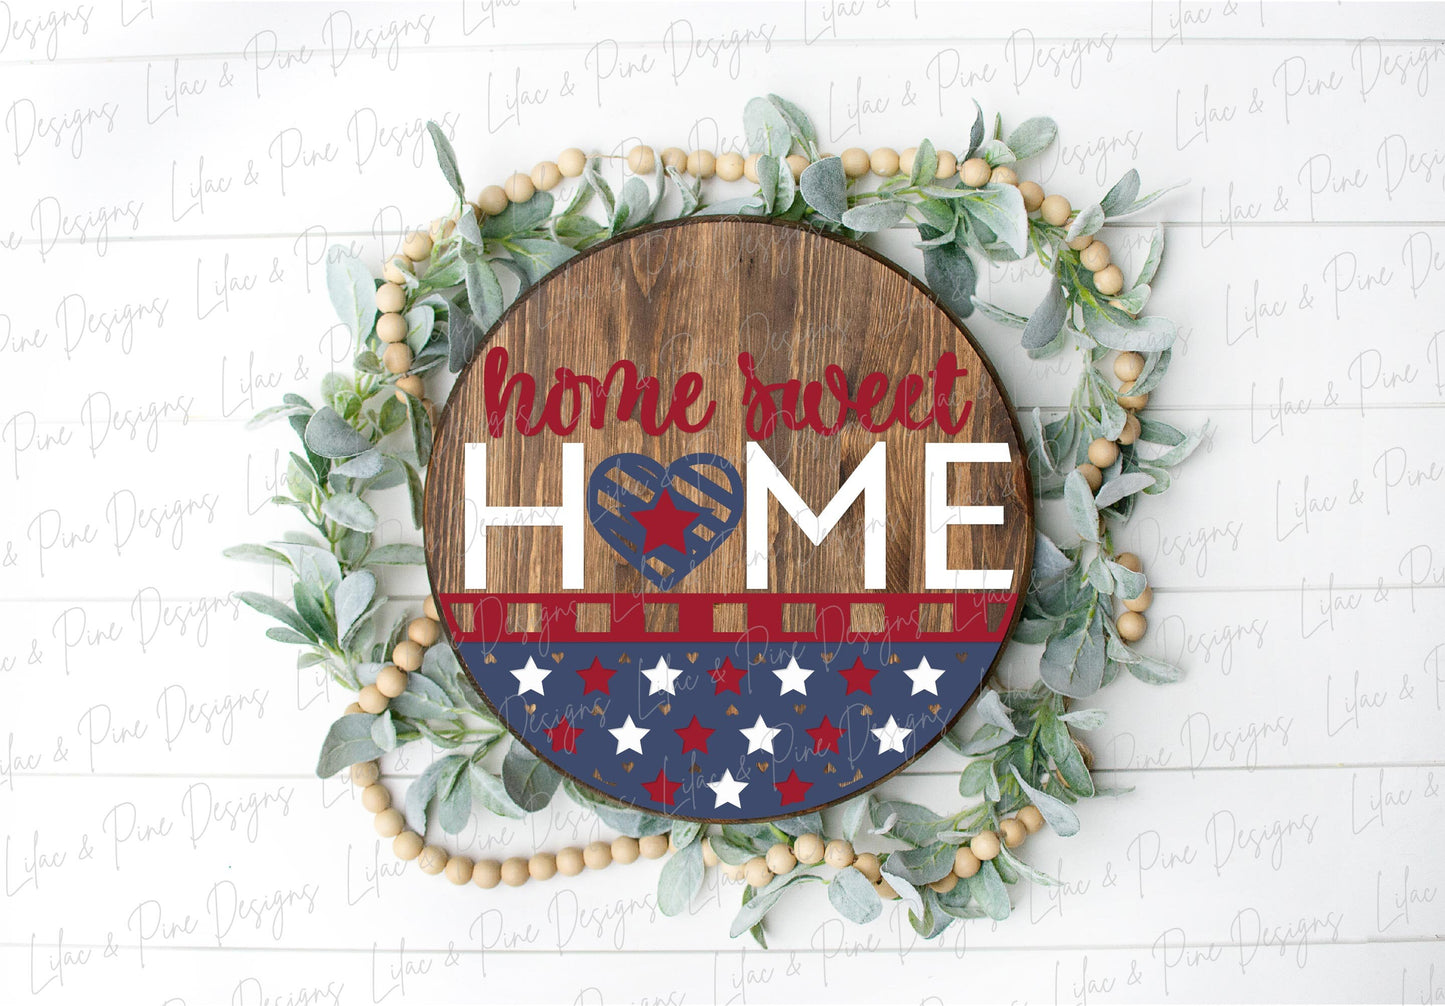 America home sweet home SVG, 4th of July welcome sign SVG, Fourth of July door hanger, Patriotic round sign, Glowforge SVG, laser cut file